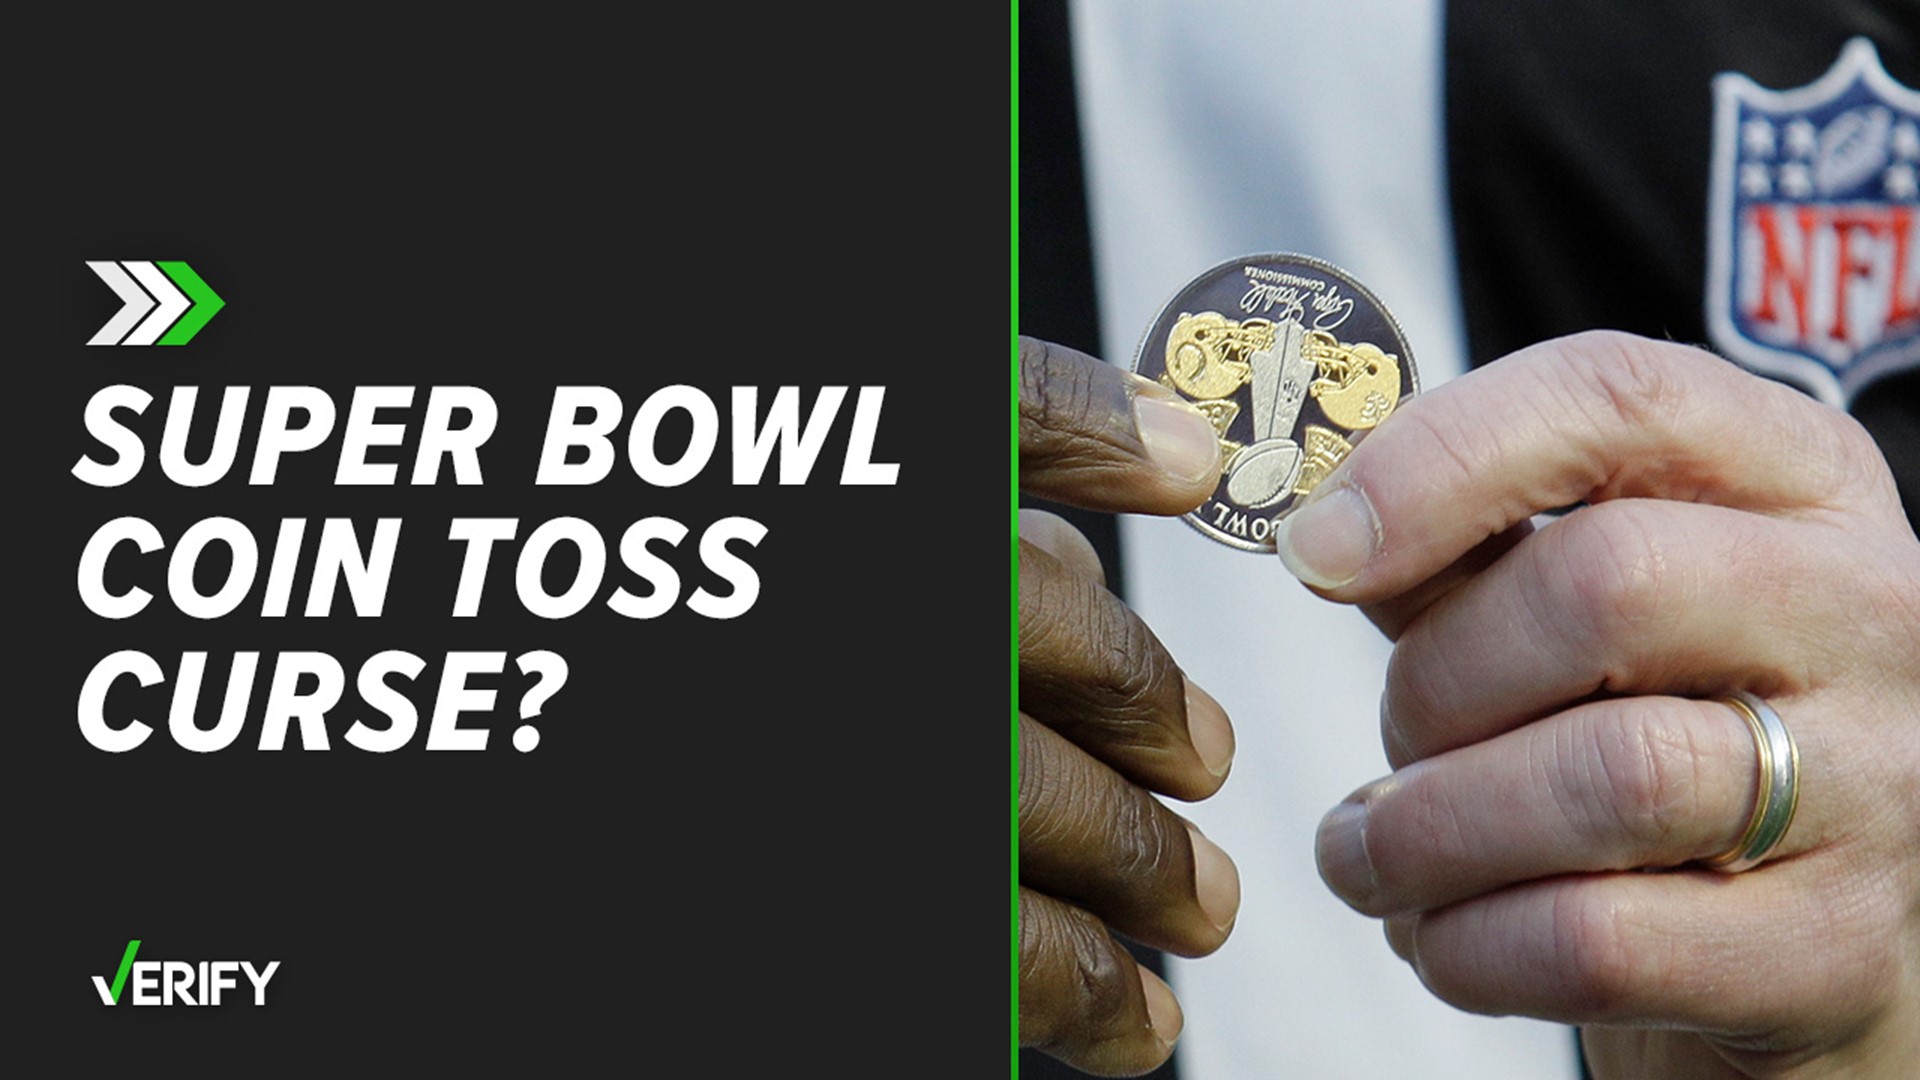 While the winner of the coin toss at the Super Bowl might seem to have luck on their side, historically it hasn't always led to a win for that team.